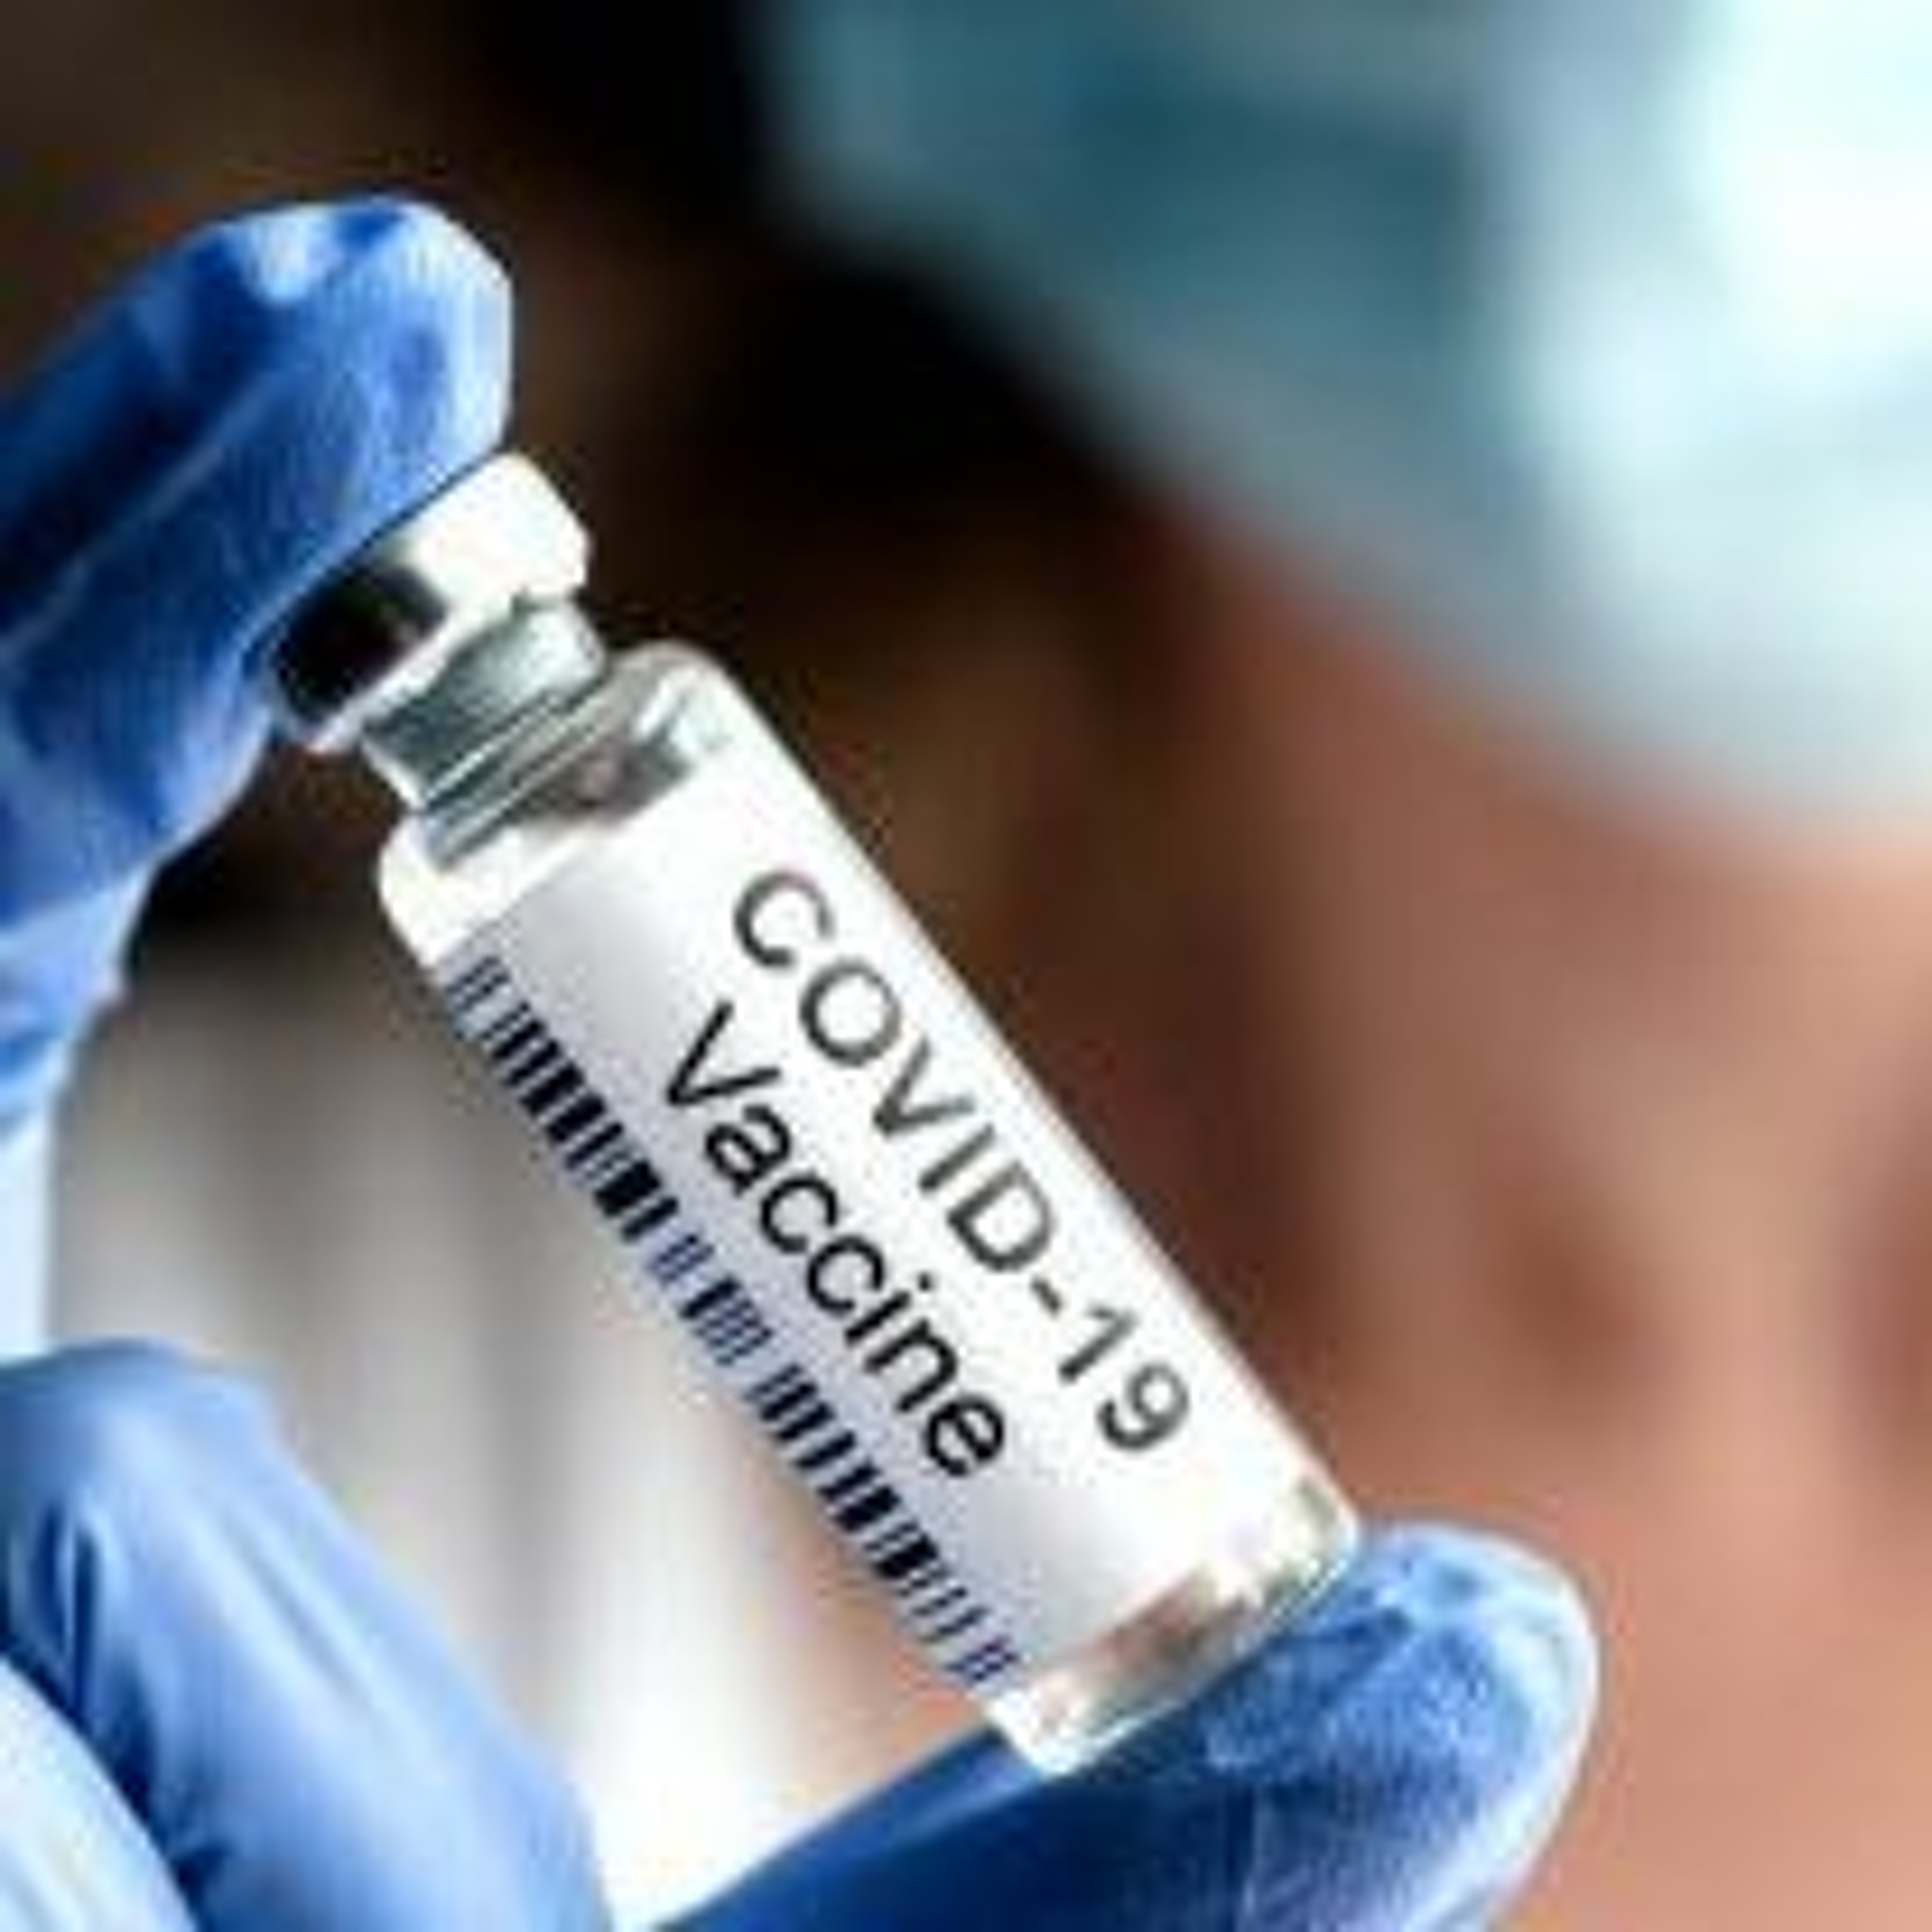 Repeat -A Life Saving Hope or Death Defying Jab? Three Perspectives on COVID vaccine